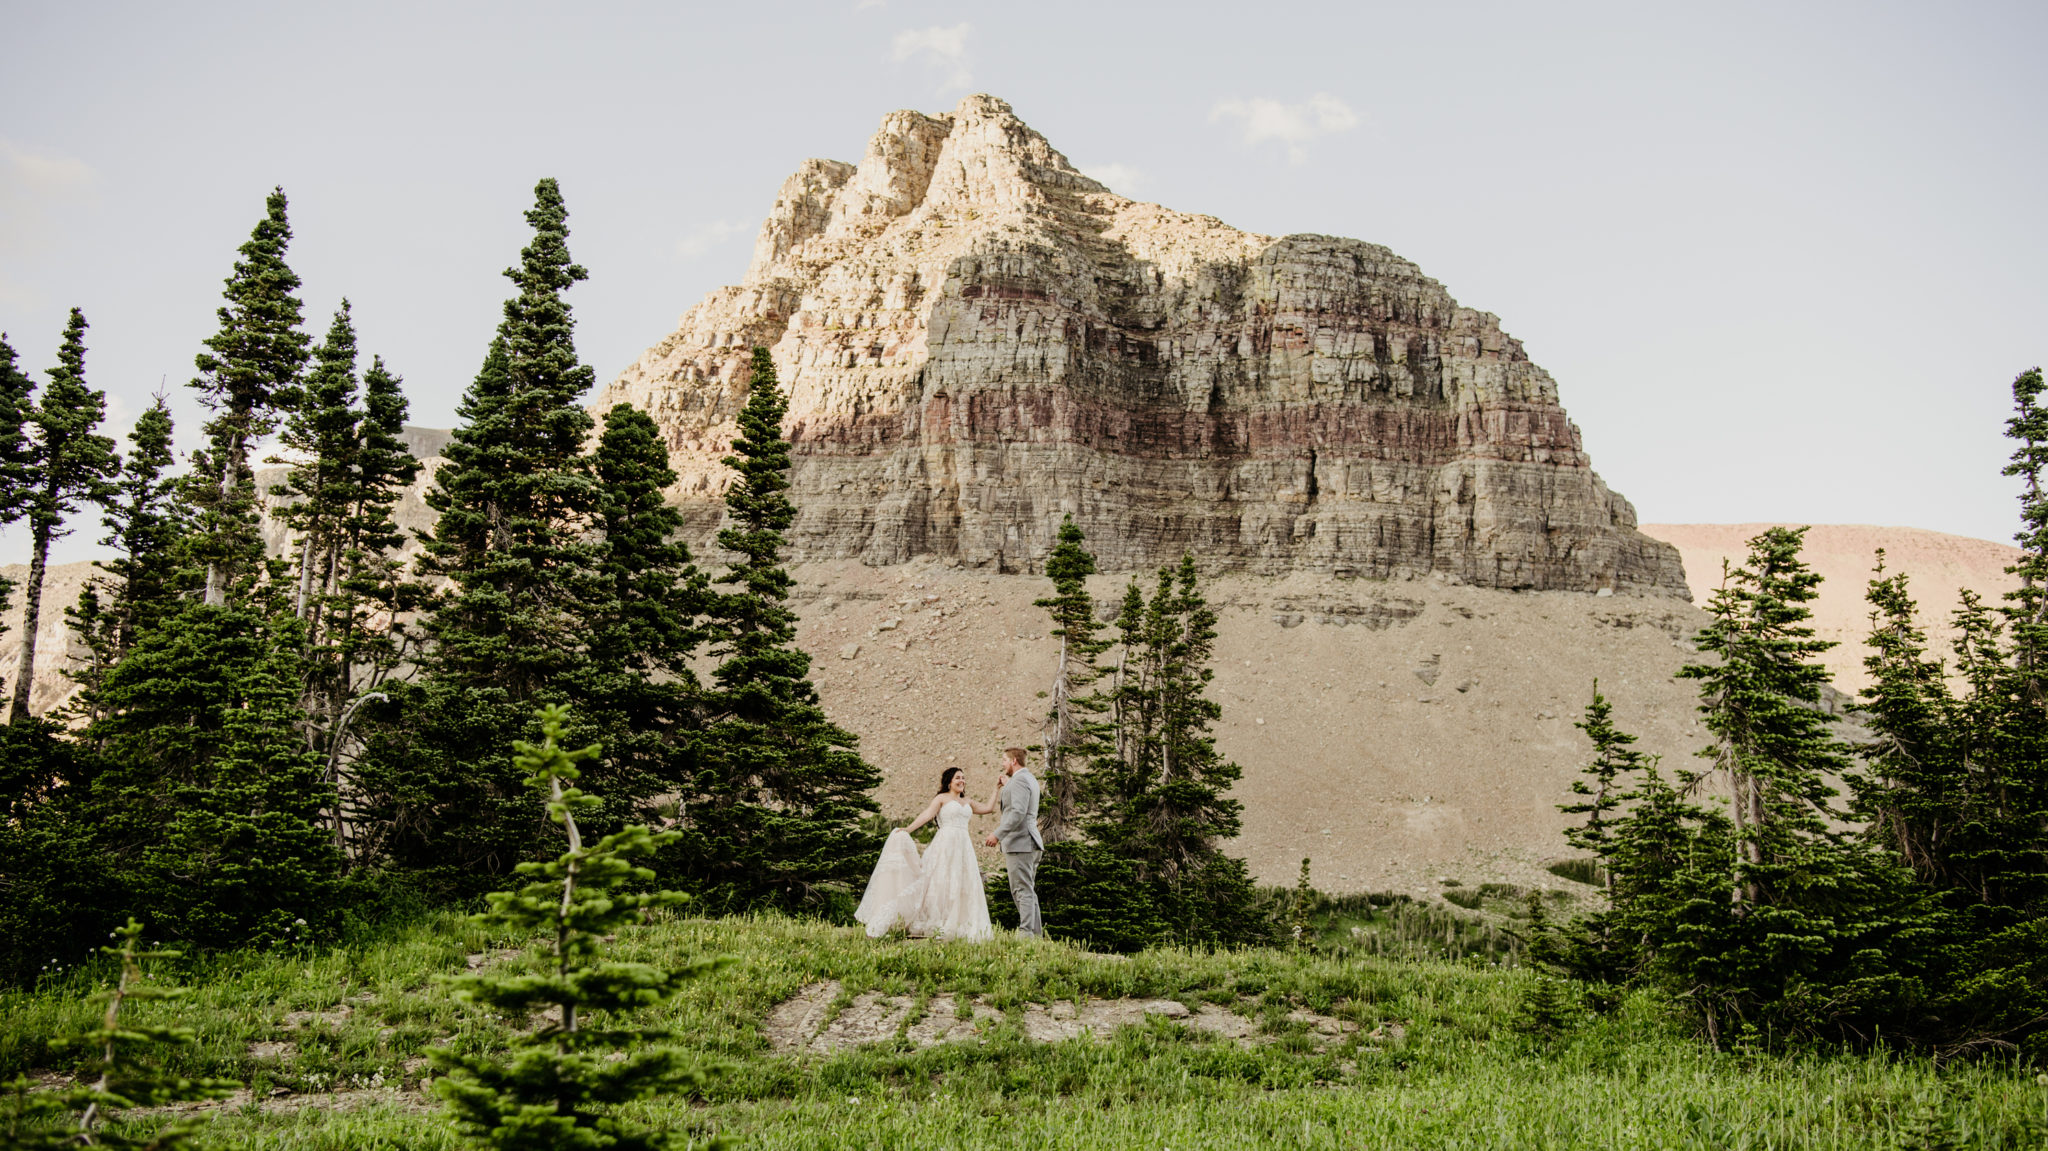 Logan pass glacier national park with bride and groom